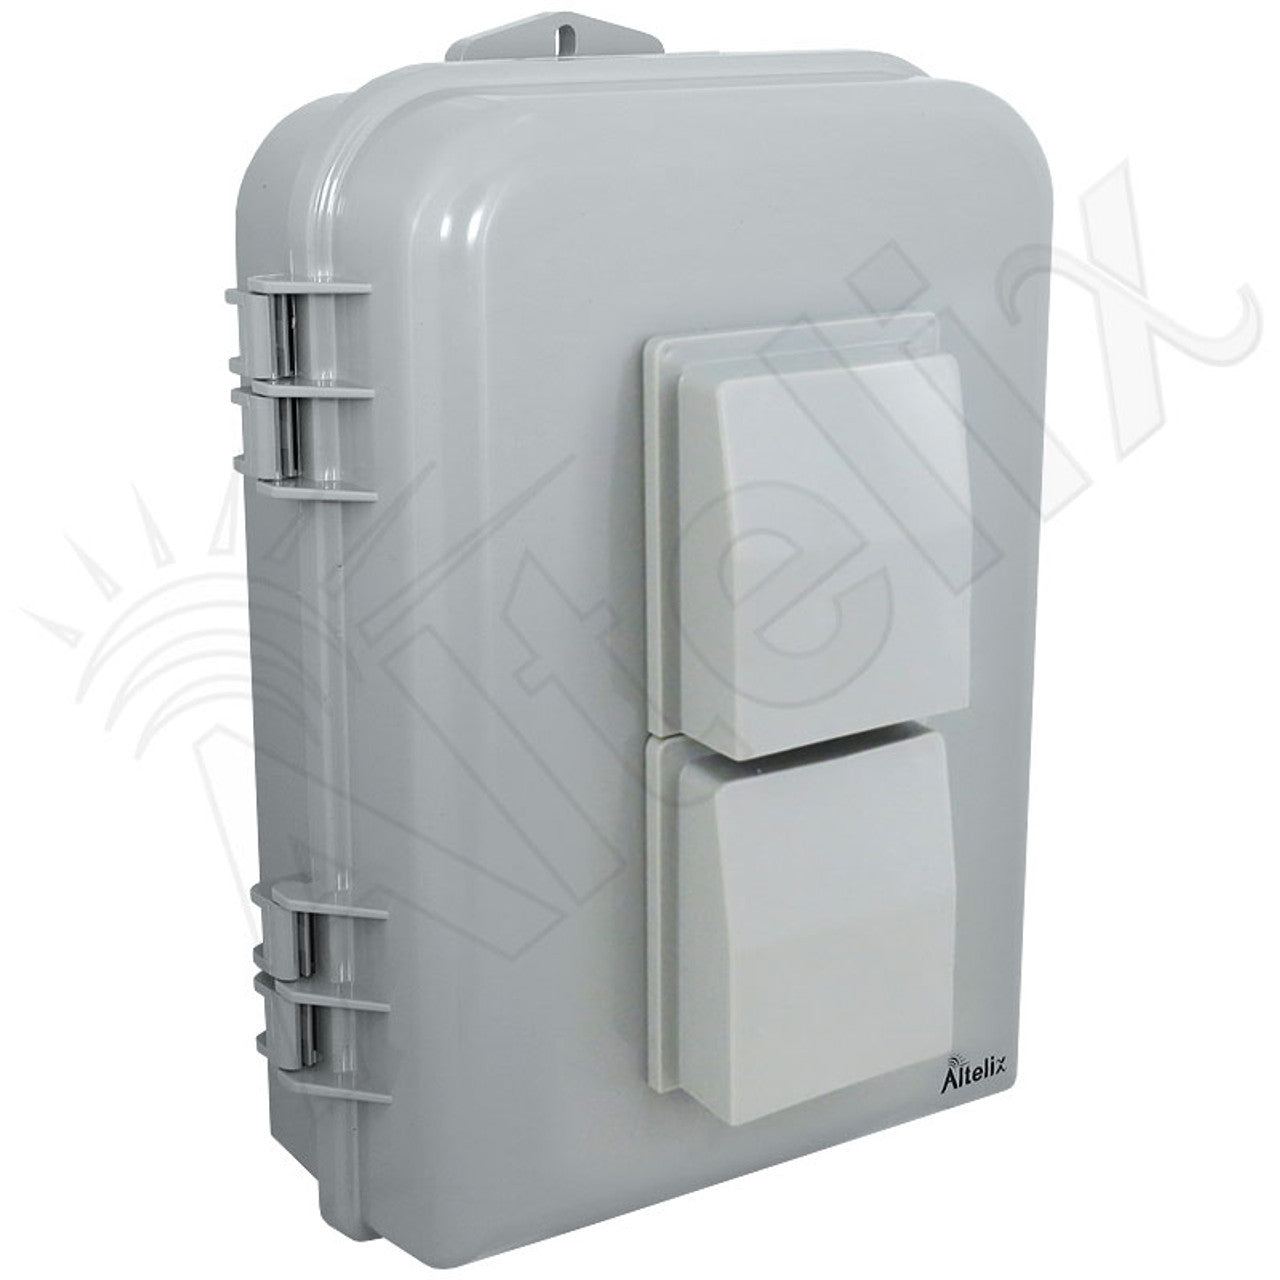 Altelix 15x10x5 Polycarbonate + ABS Vented Weatherproof Enclosure with Aluminum Mounting Plate, 120 VAC Outlet & Power Cord